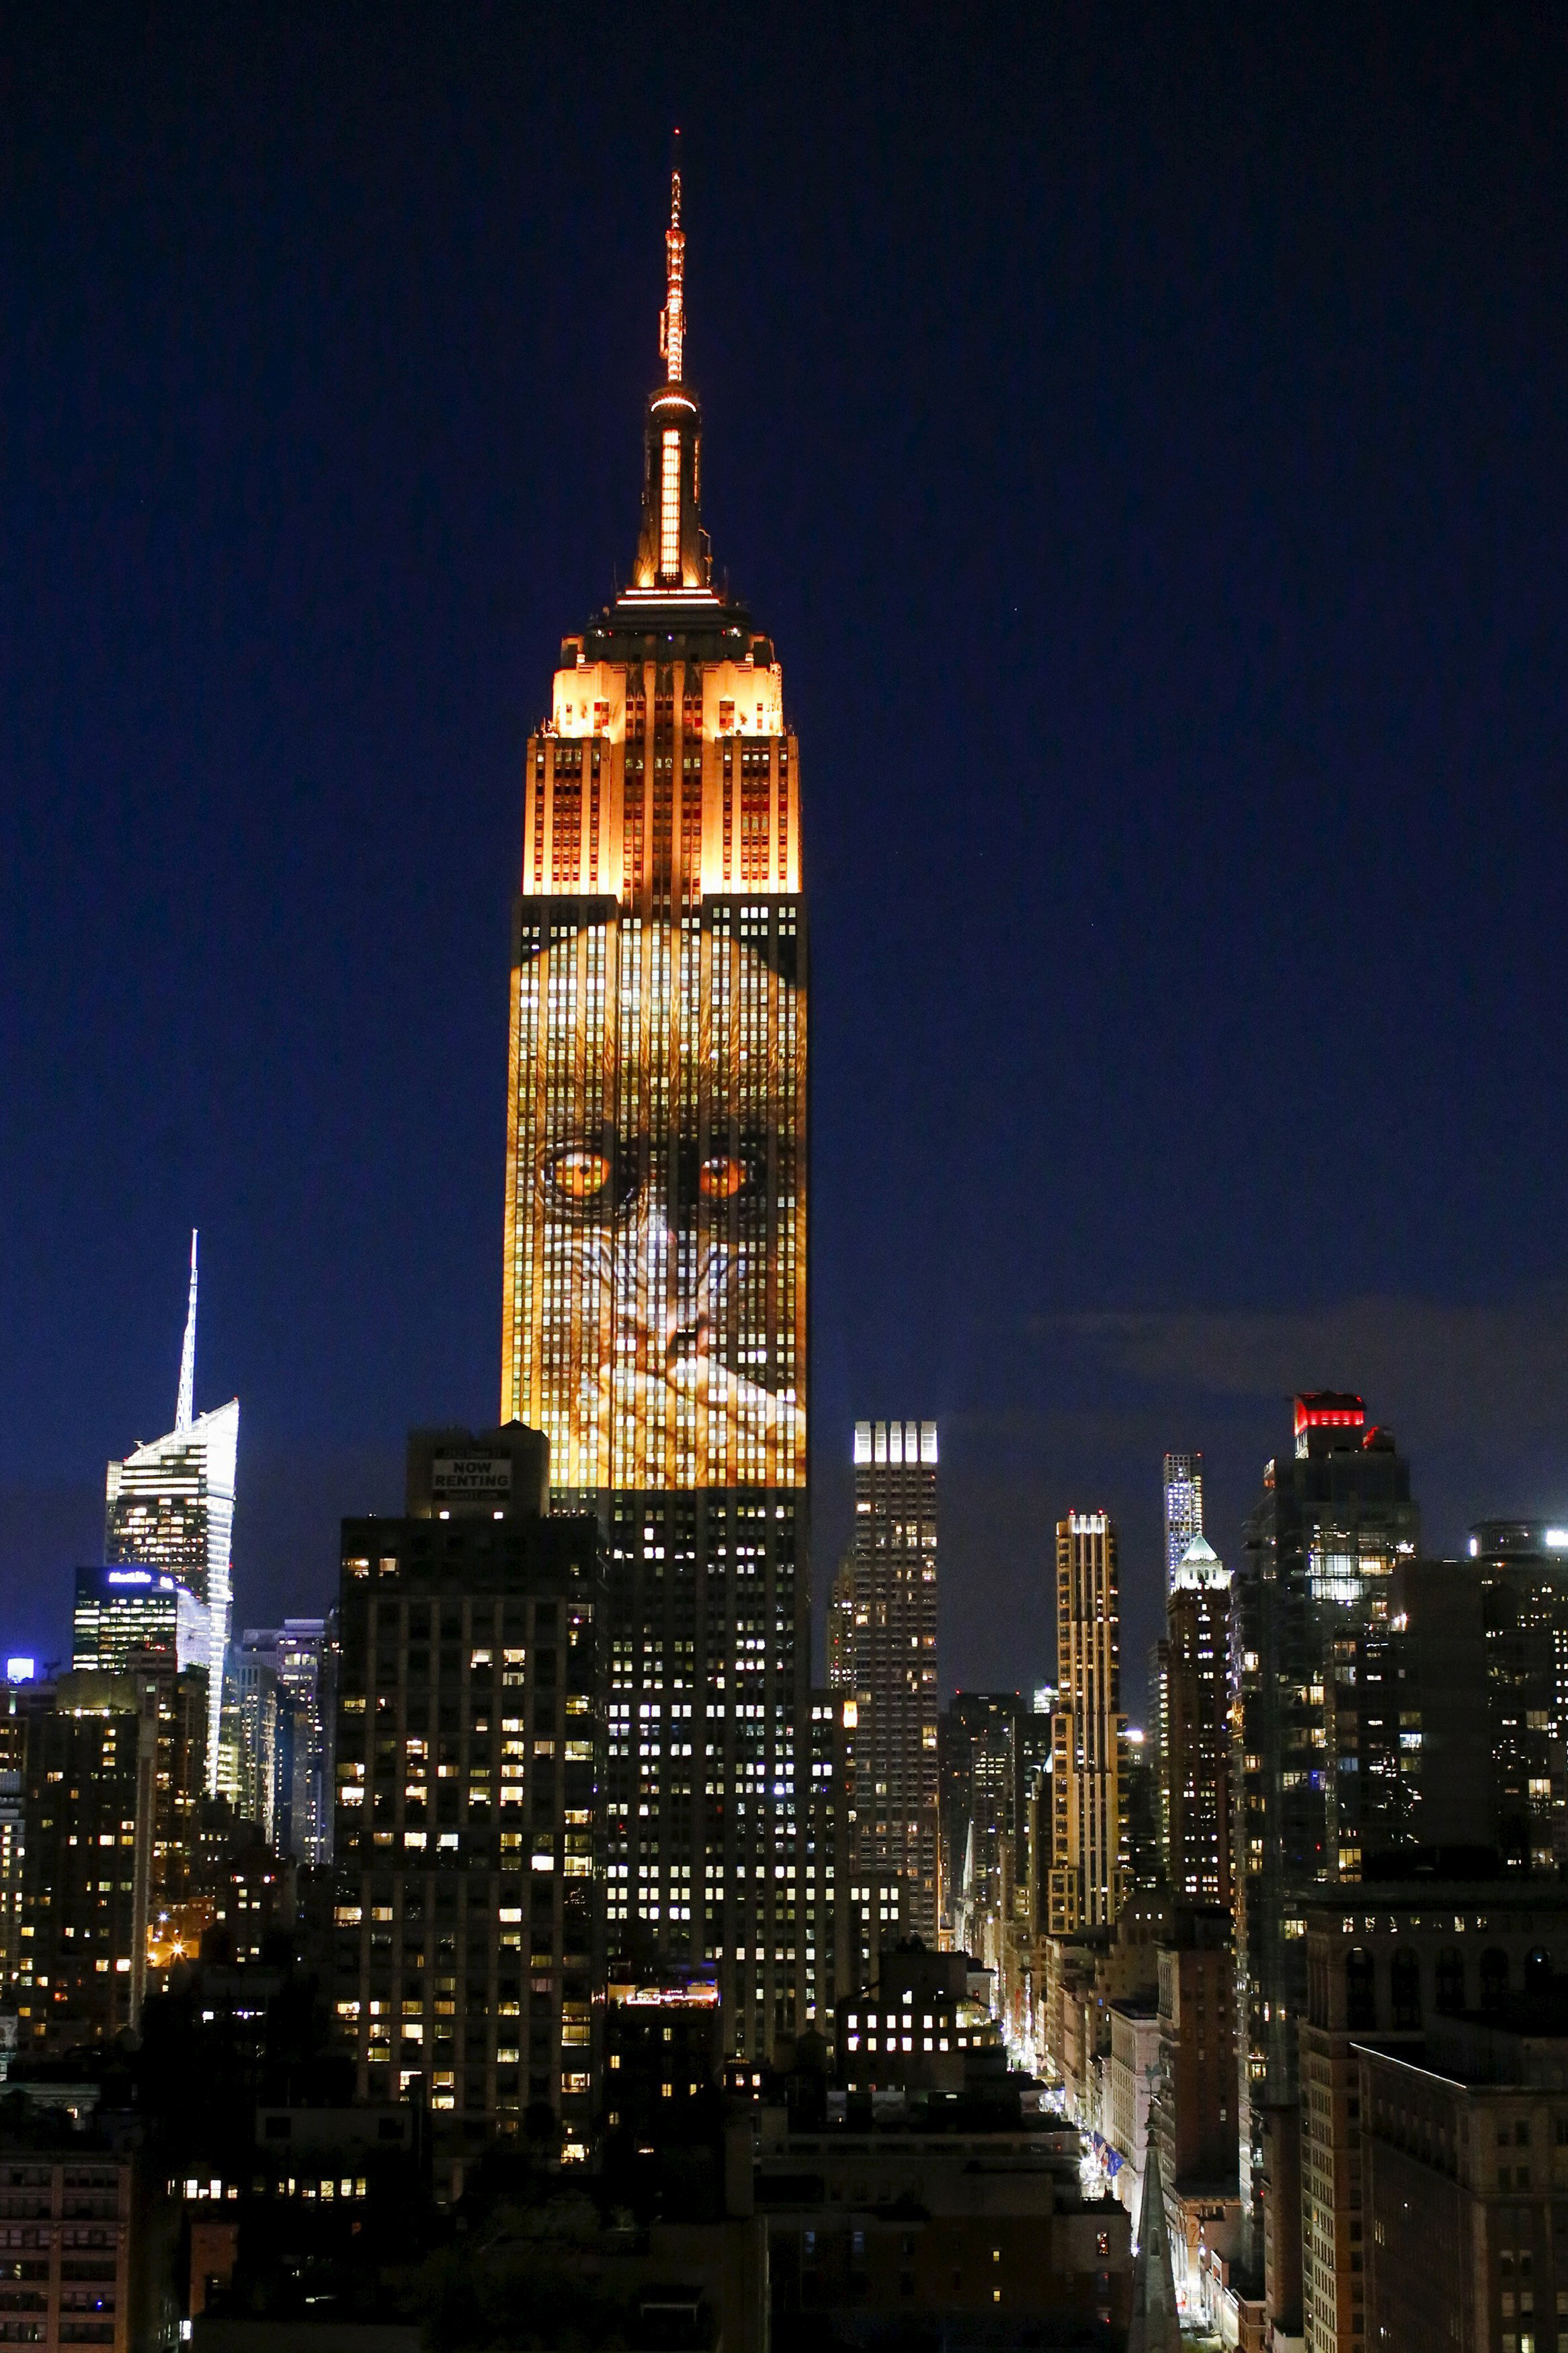 Large images of endangered species are projected on the south facade of The Empire State Building on Aug. 1, 2015, in New York City.